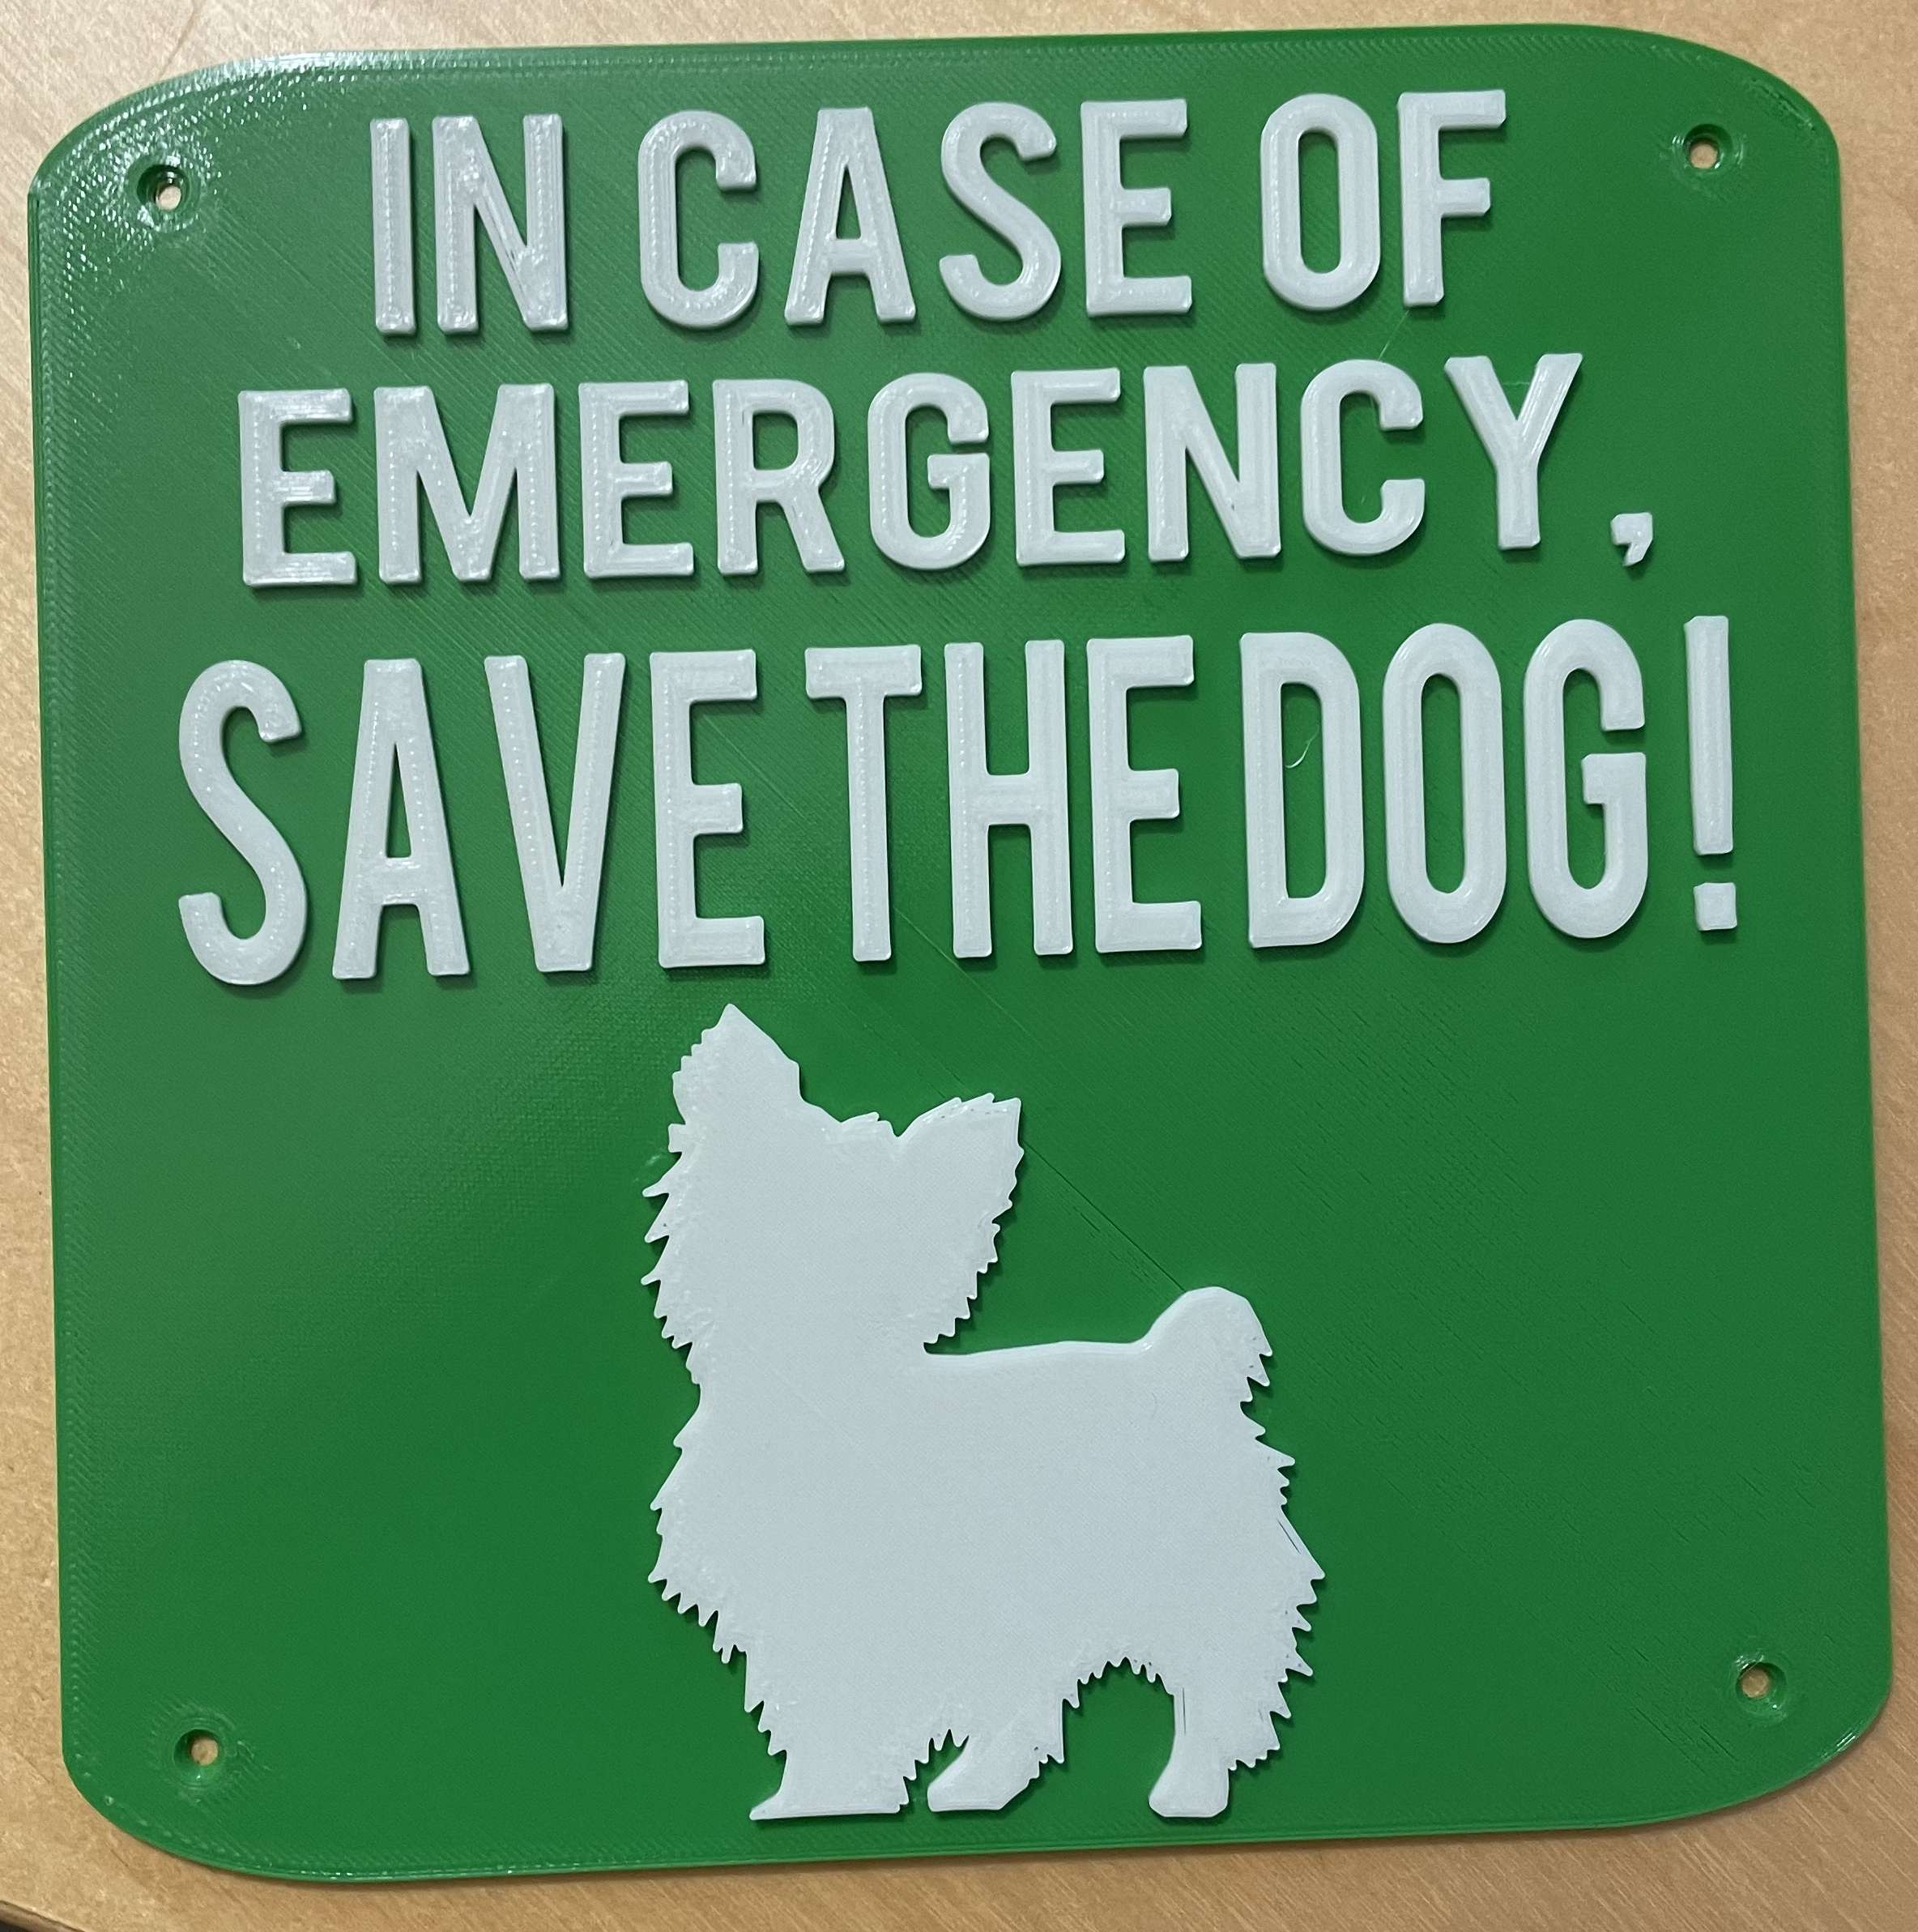 Sign "Save the dogs"